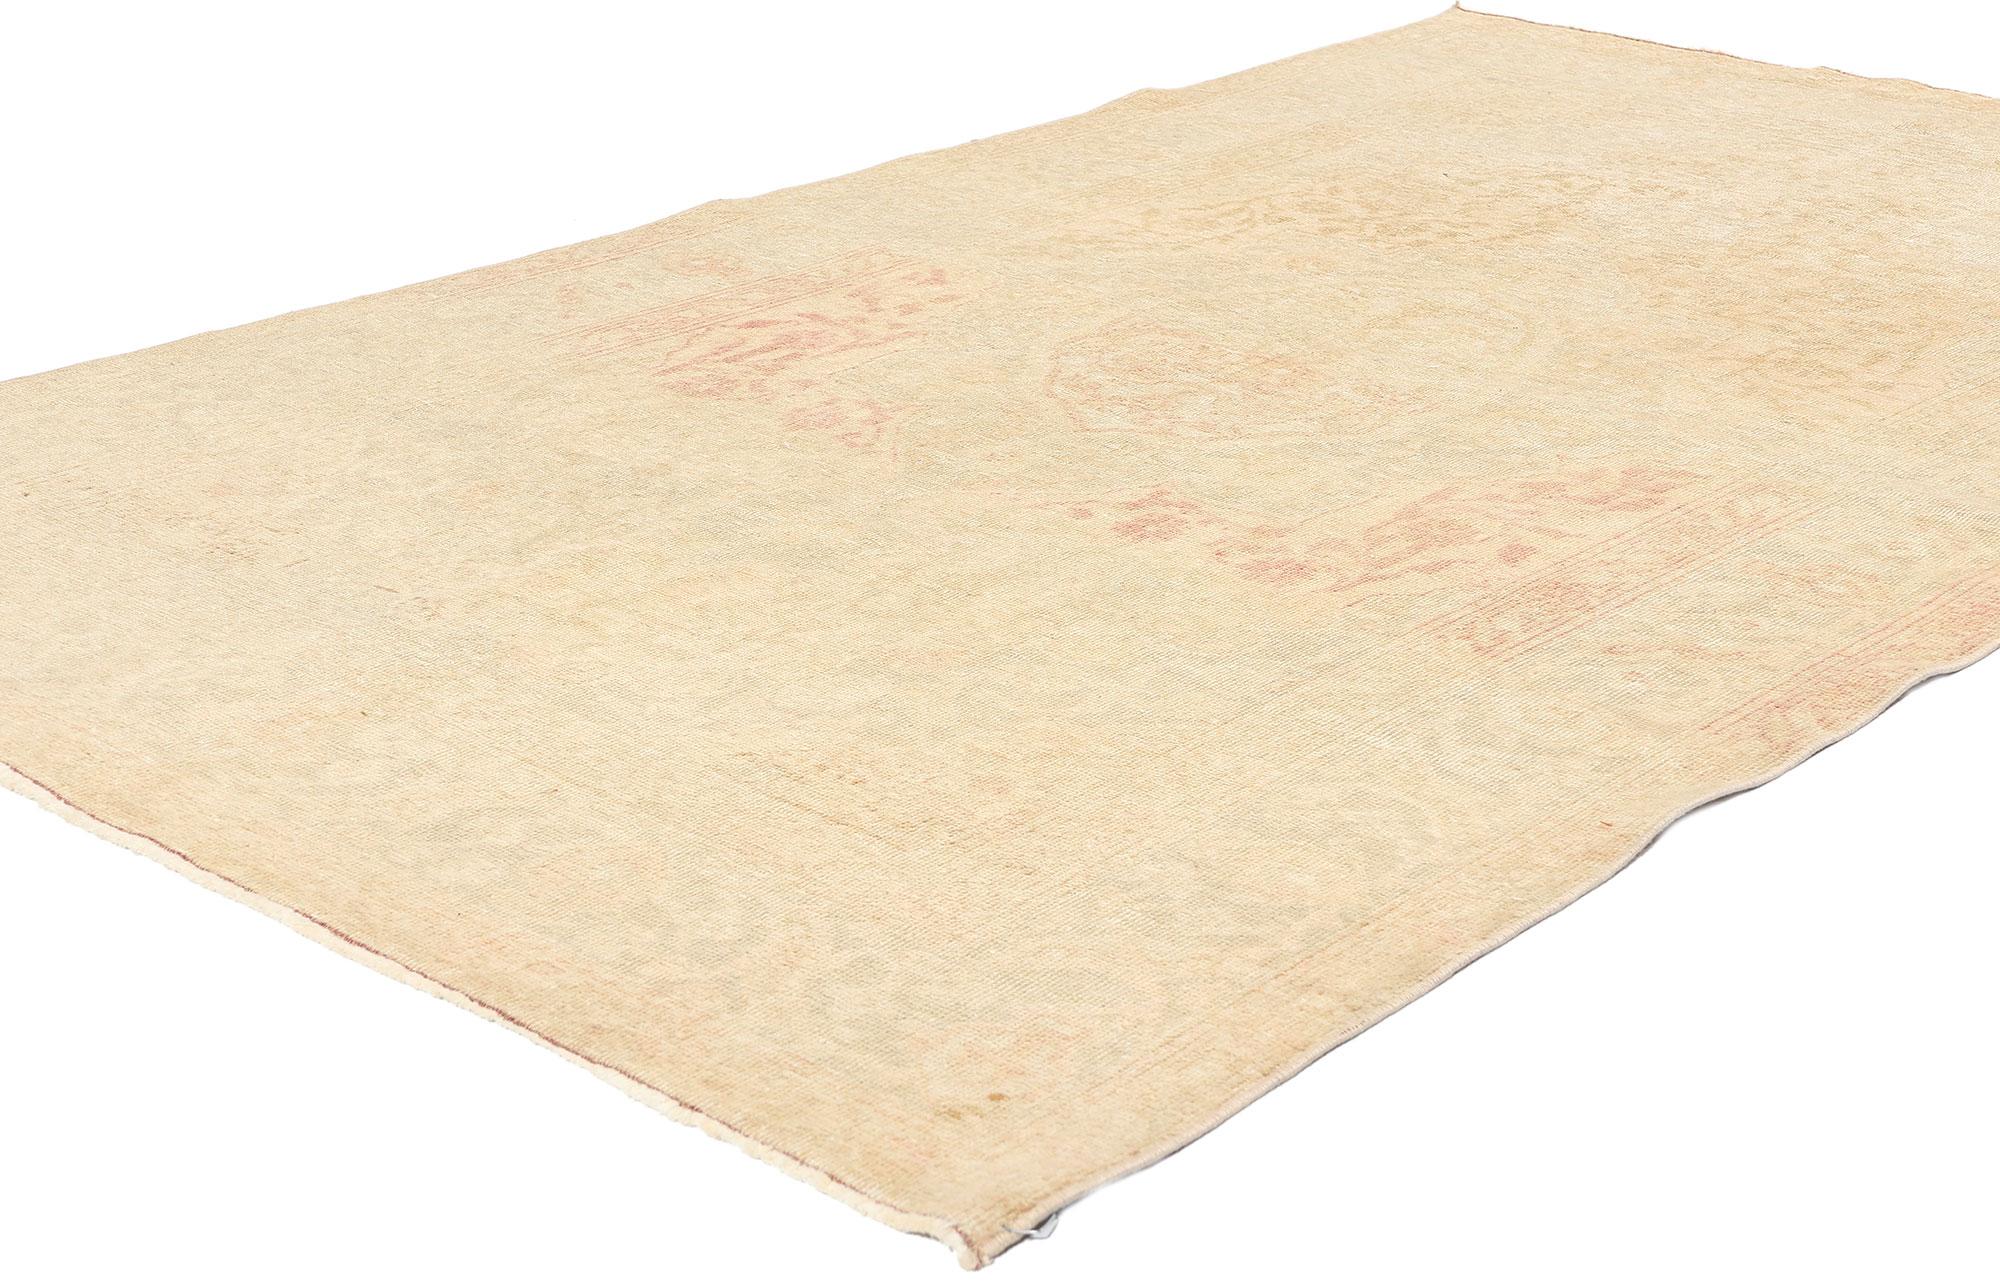 53472 Vintage Turkish Sivas Rug, 04'05 x 07'06. Antique-washed Turkish Sivas rugs, originating from the Sivas region of Turkey, are hand-knotted masterpieces known for their delicate patterns and soft, muted colors. These Sivas rugs feature